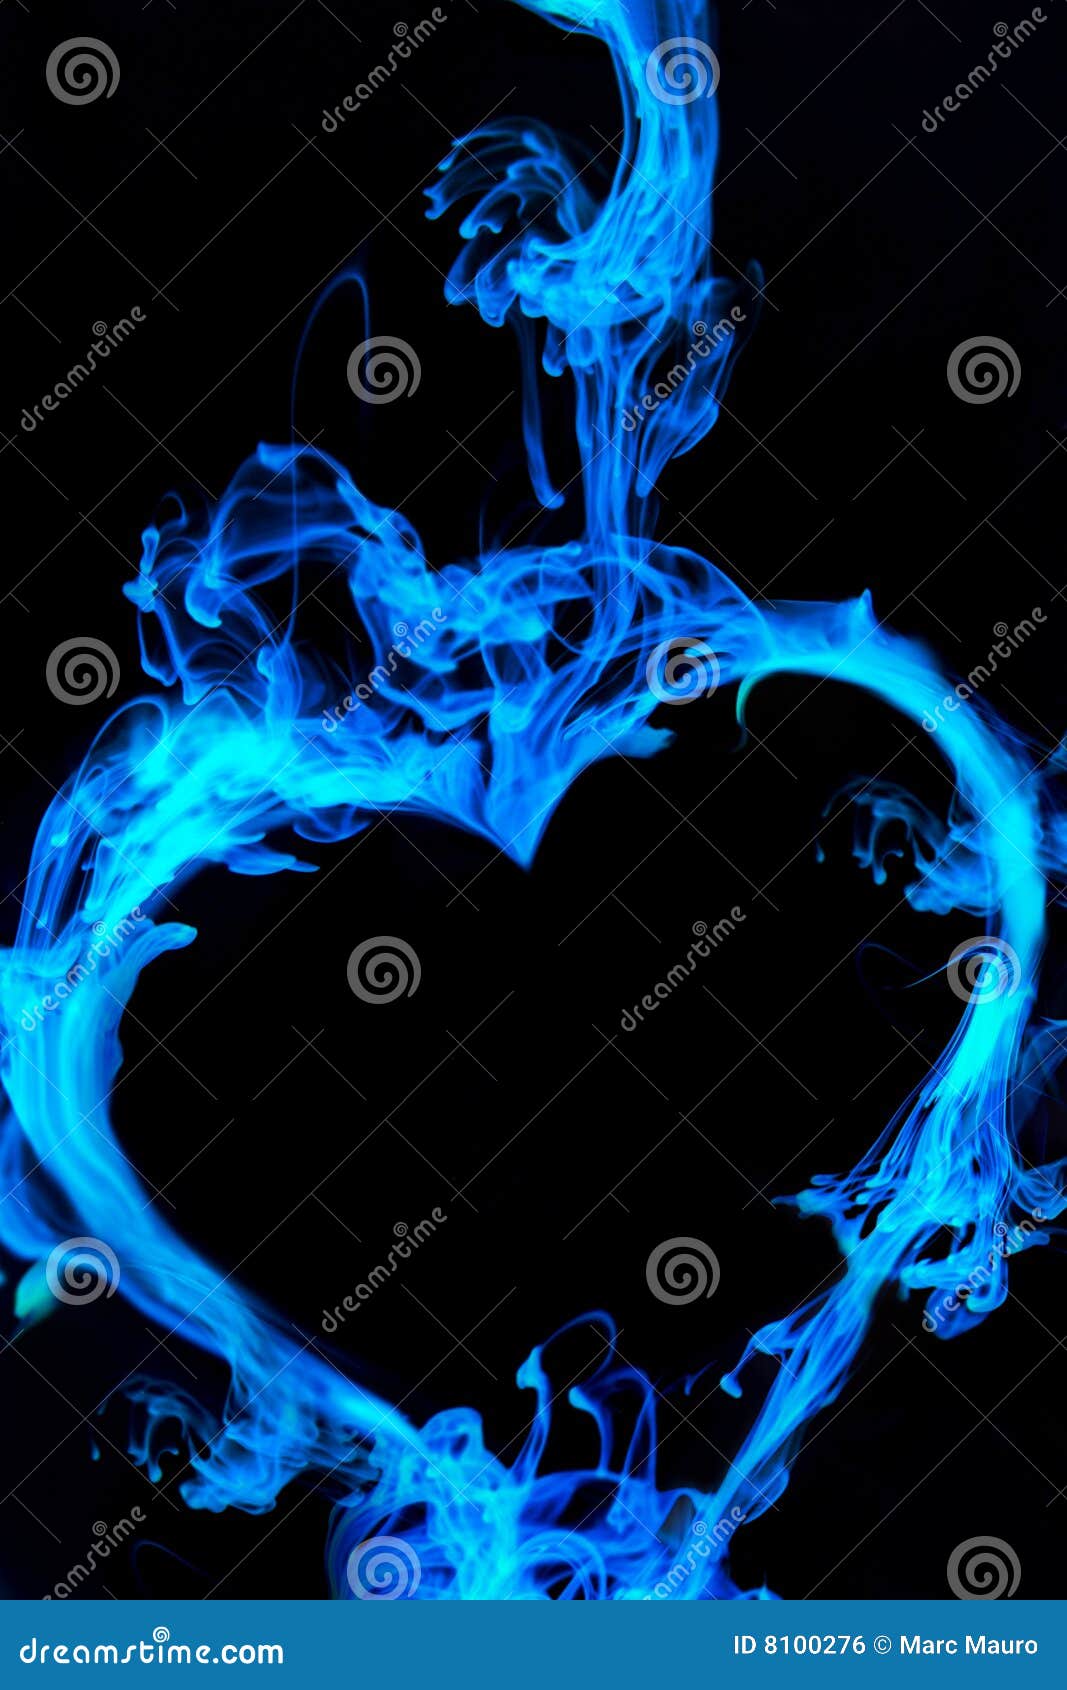 Blue Black Heart Stock Photo. Image Of Background, Questionmarc - 8100276